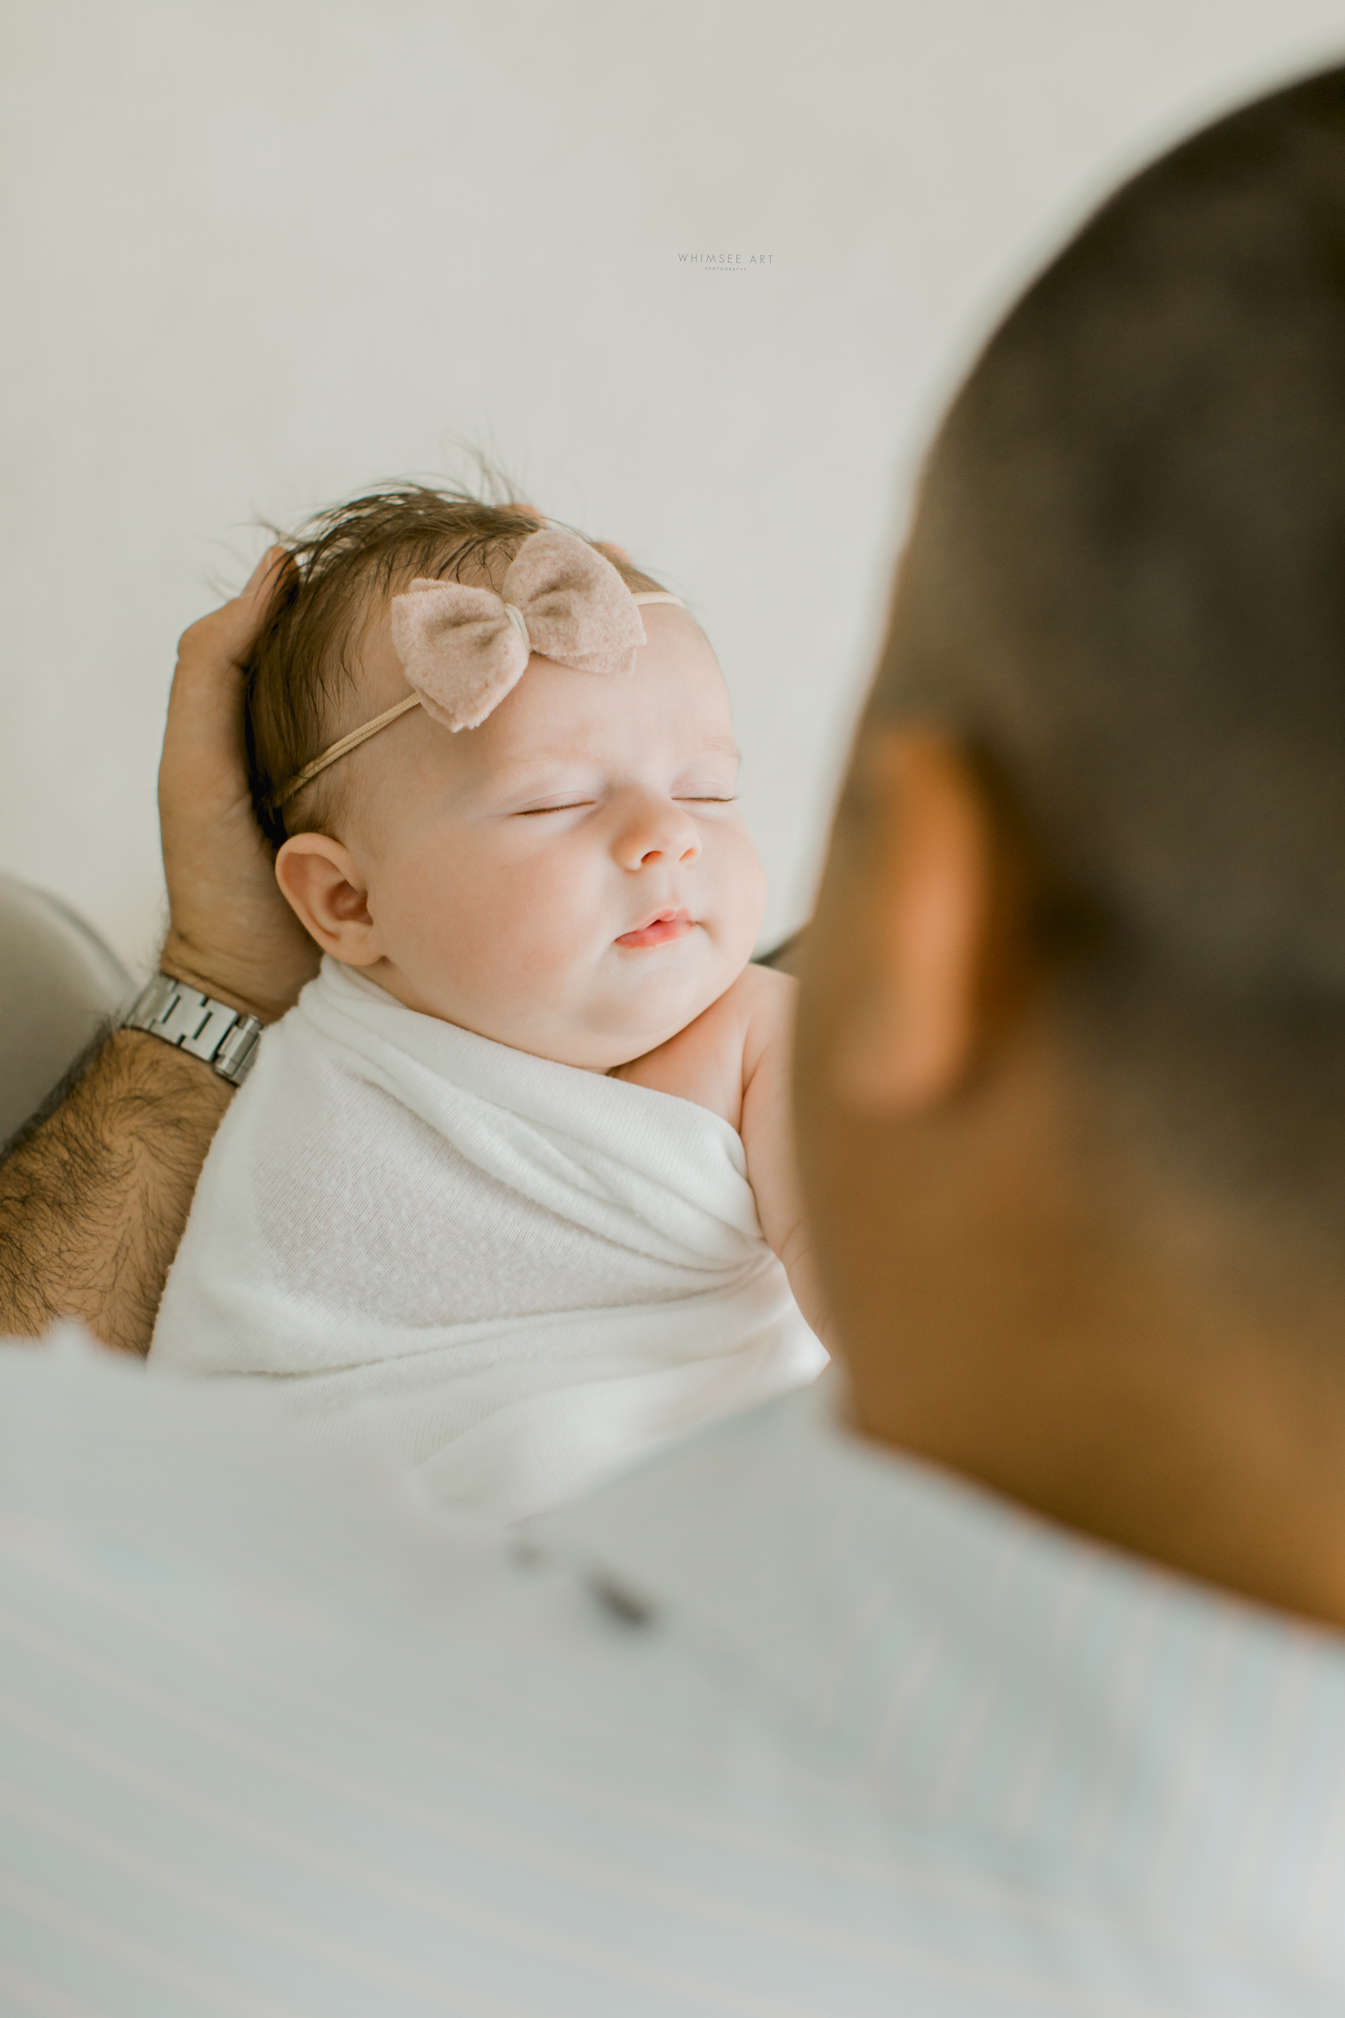 Sweet Quinn | In-Home Newborn Session | Whimsee Art Photography